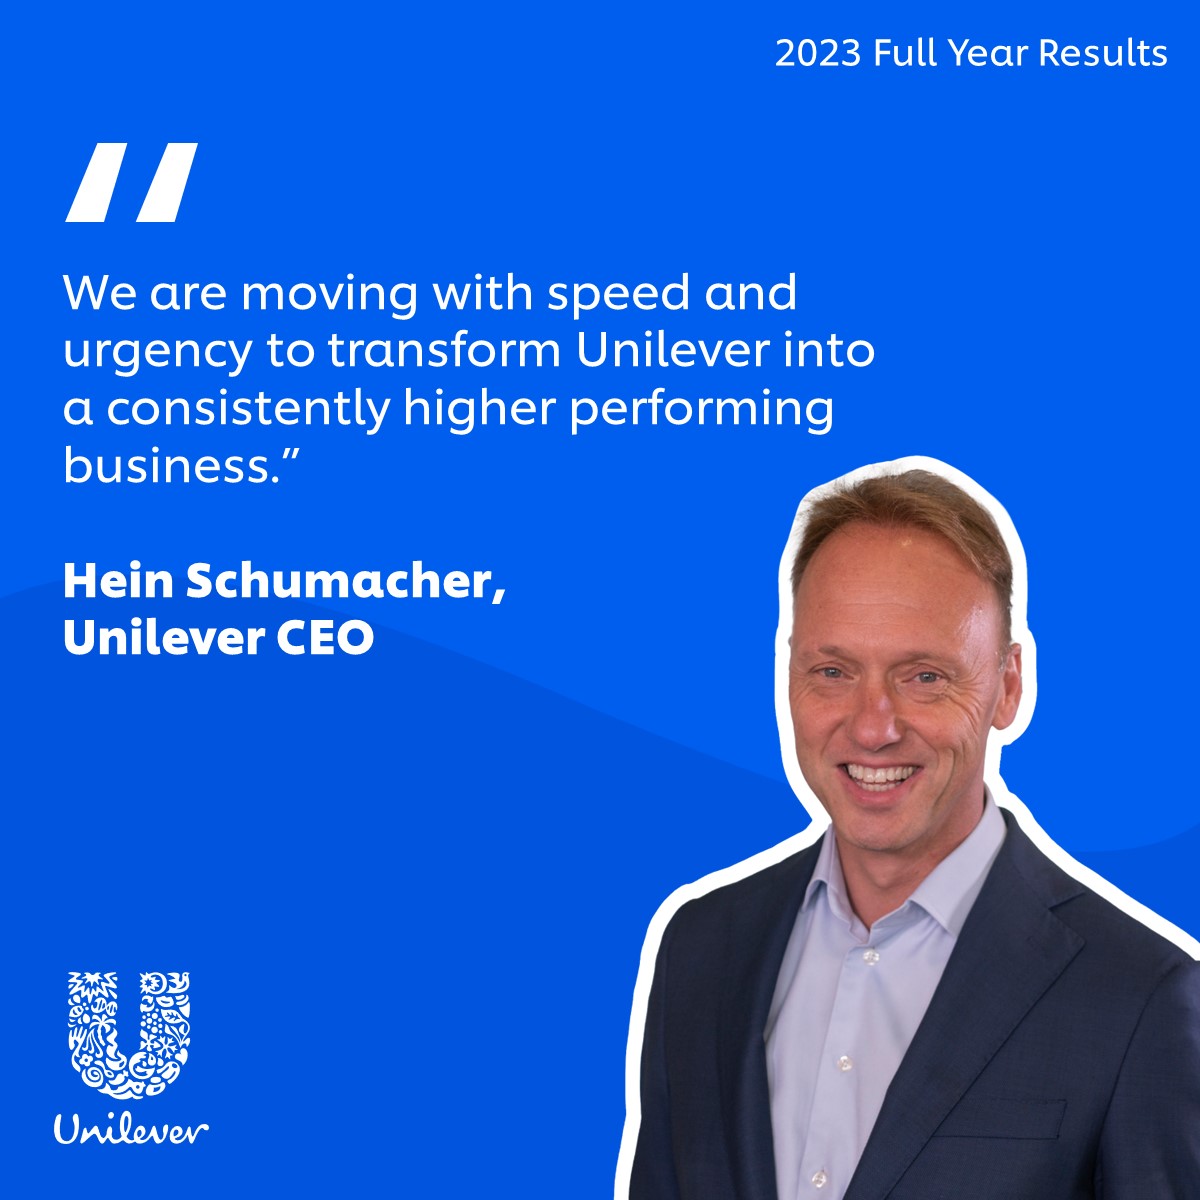 2023 Full Year Results

Our Growth Action Plan is underpinned by one simple premise: the need to do fewer things, better, with greater impact. We expect the benefits to build throughout 2024.

Read more here: unilever.com/news/press-and…

#UnileverResults $ULVR $UNA $UL